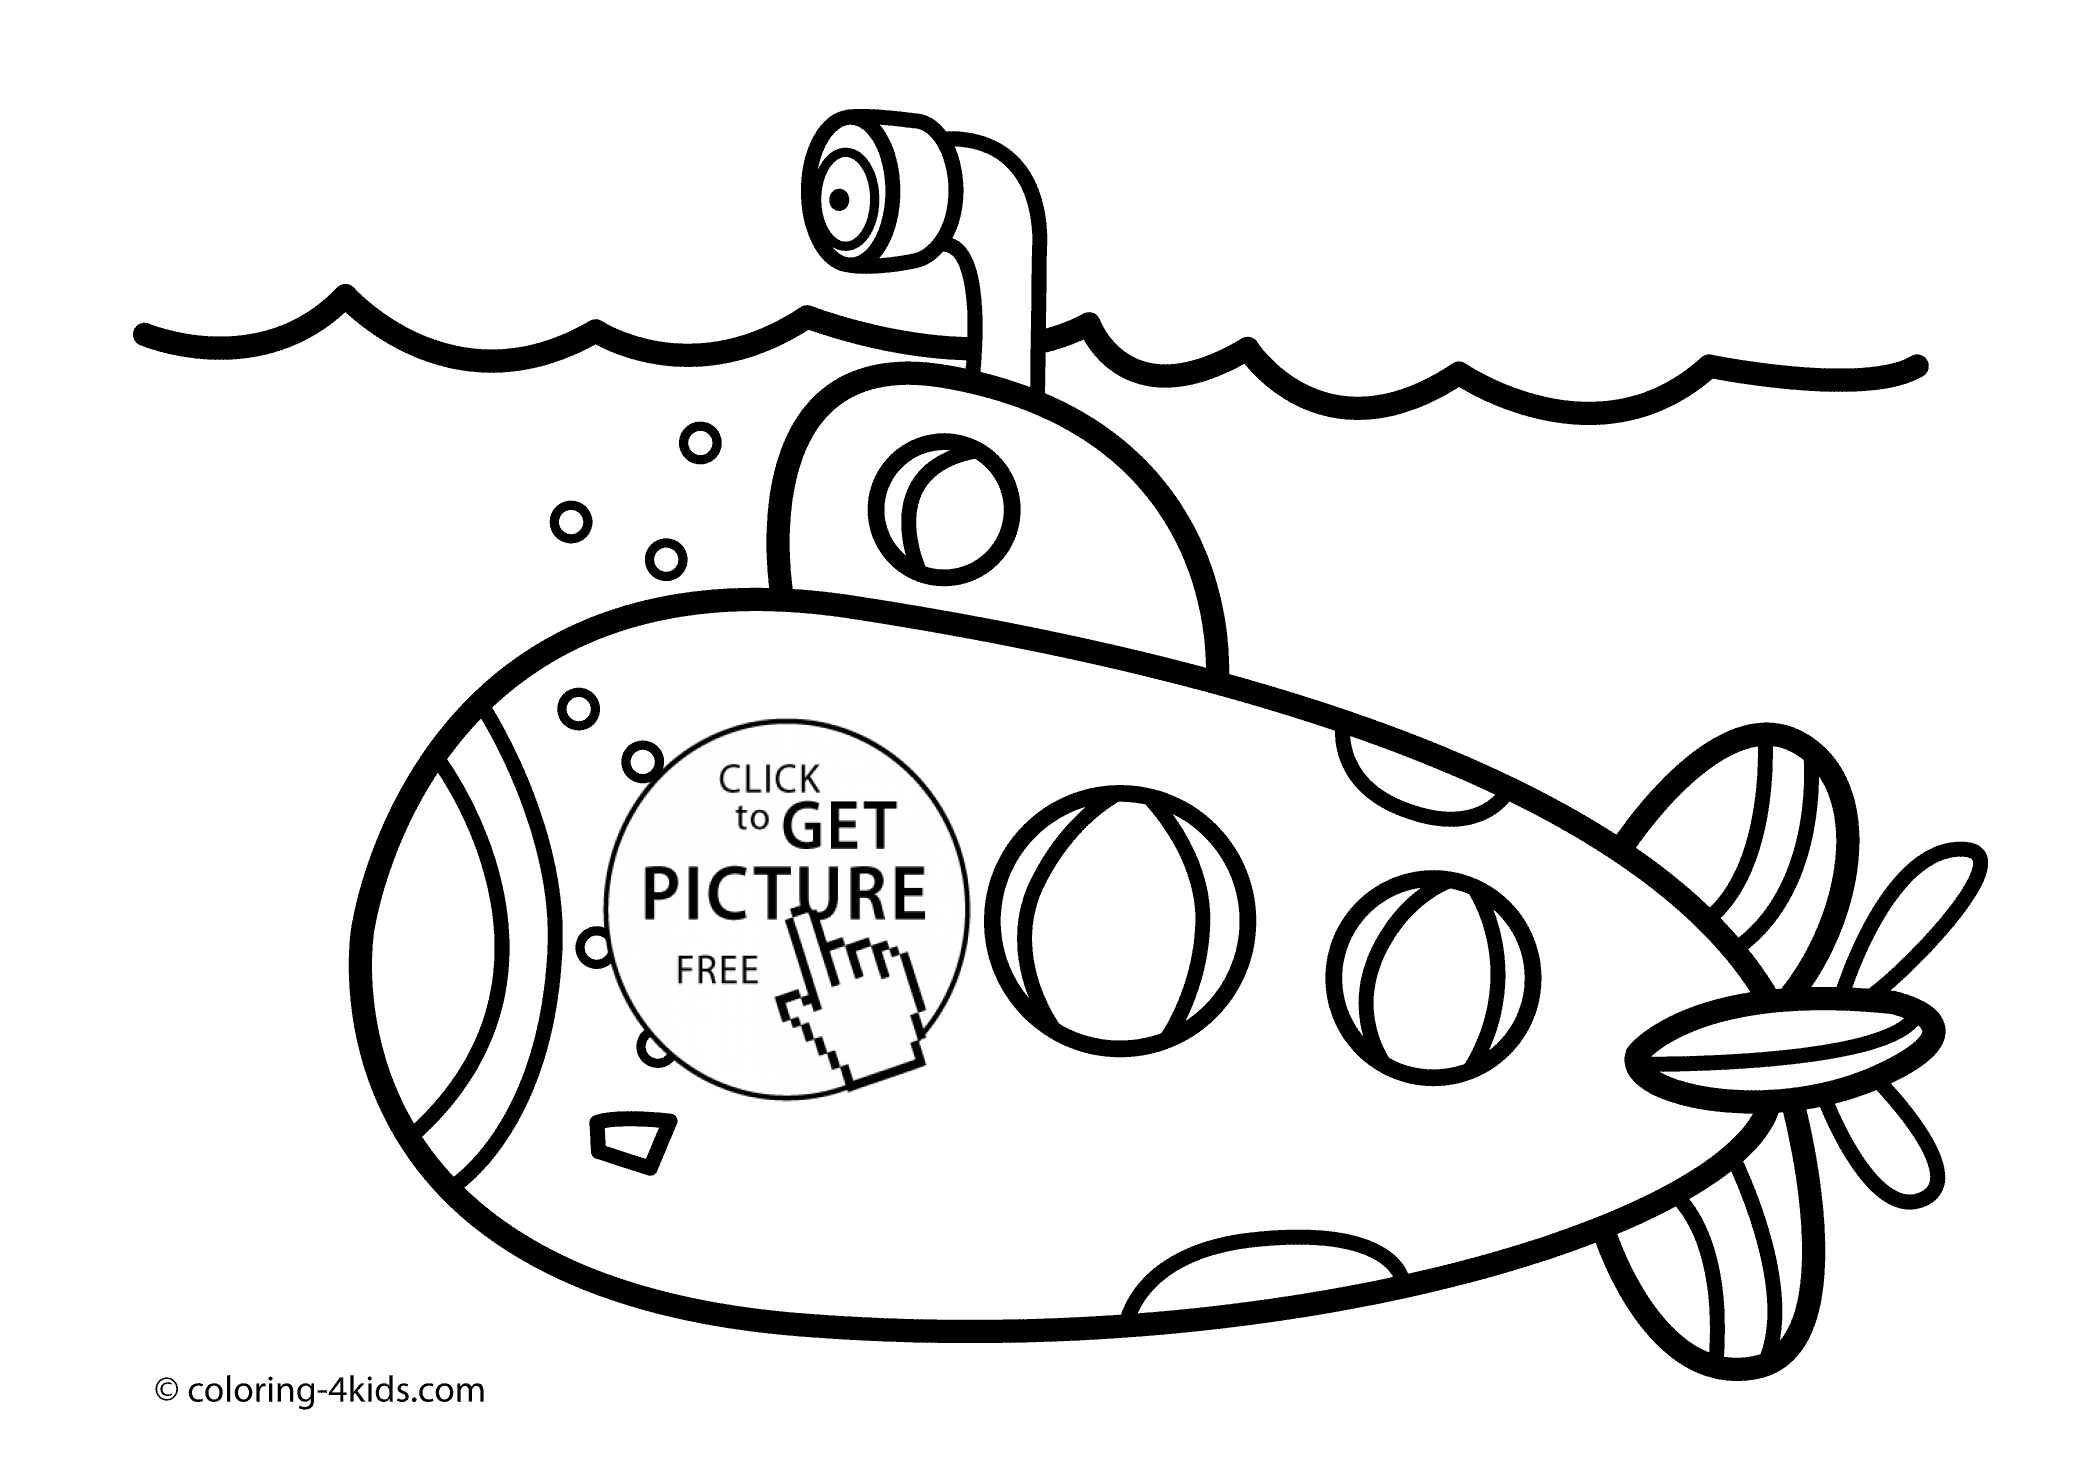 Submarine transportation coloring pages for kids, printable free ...